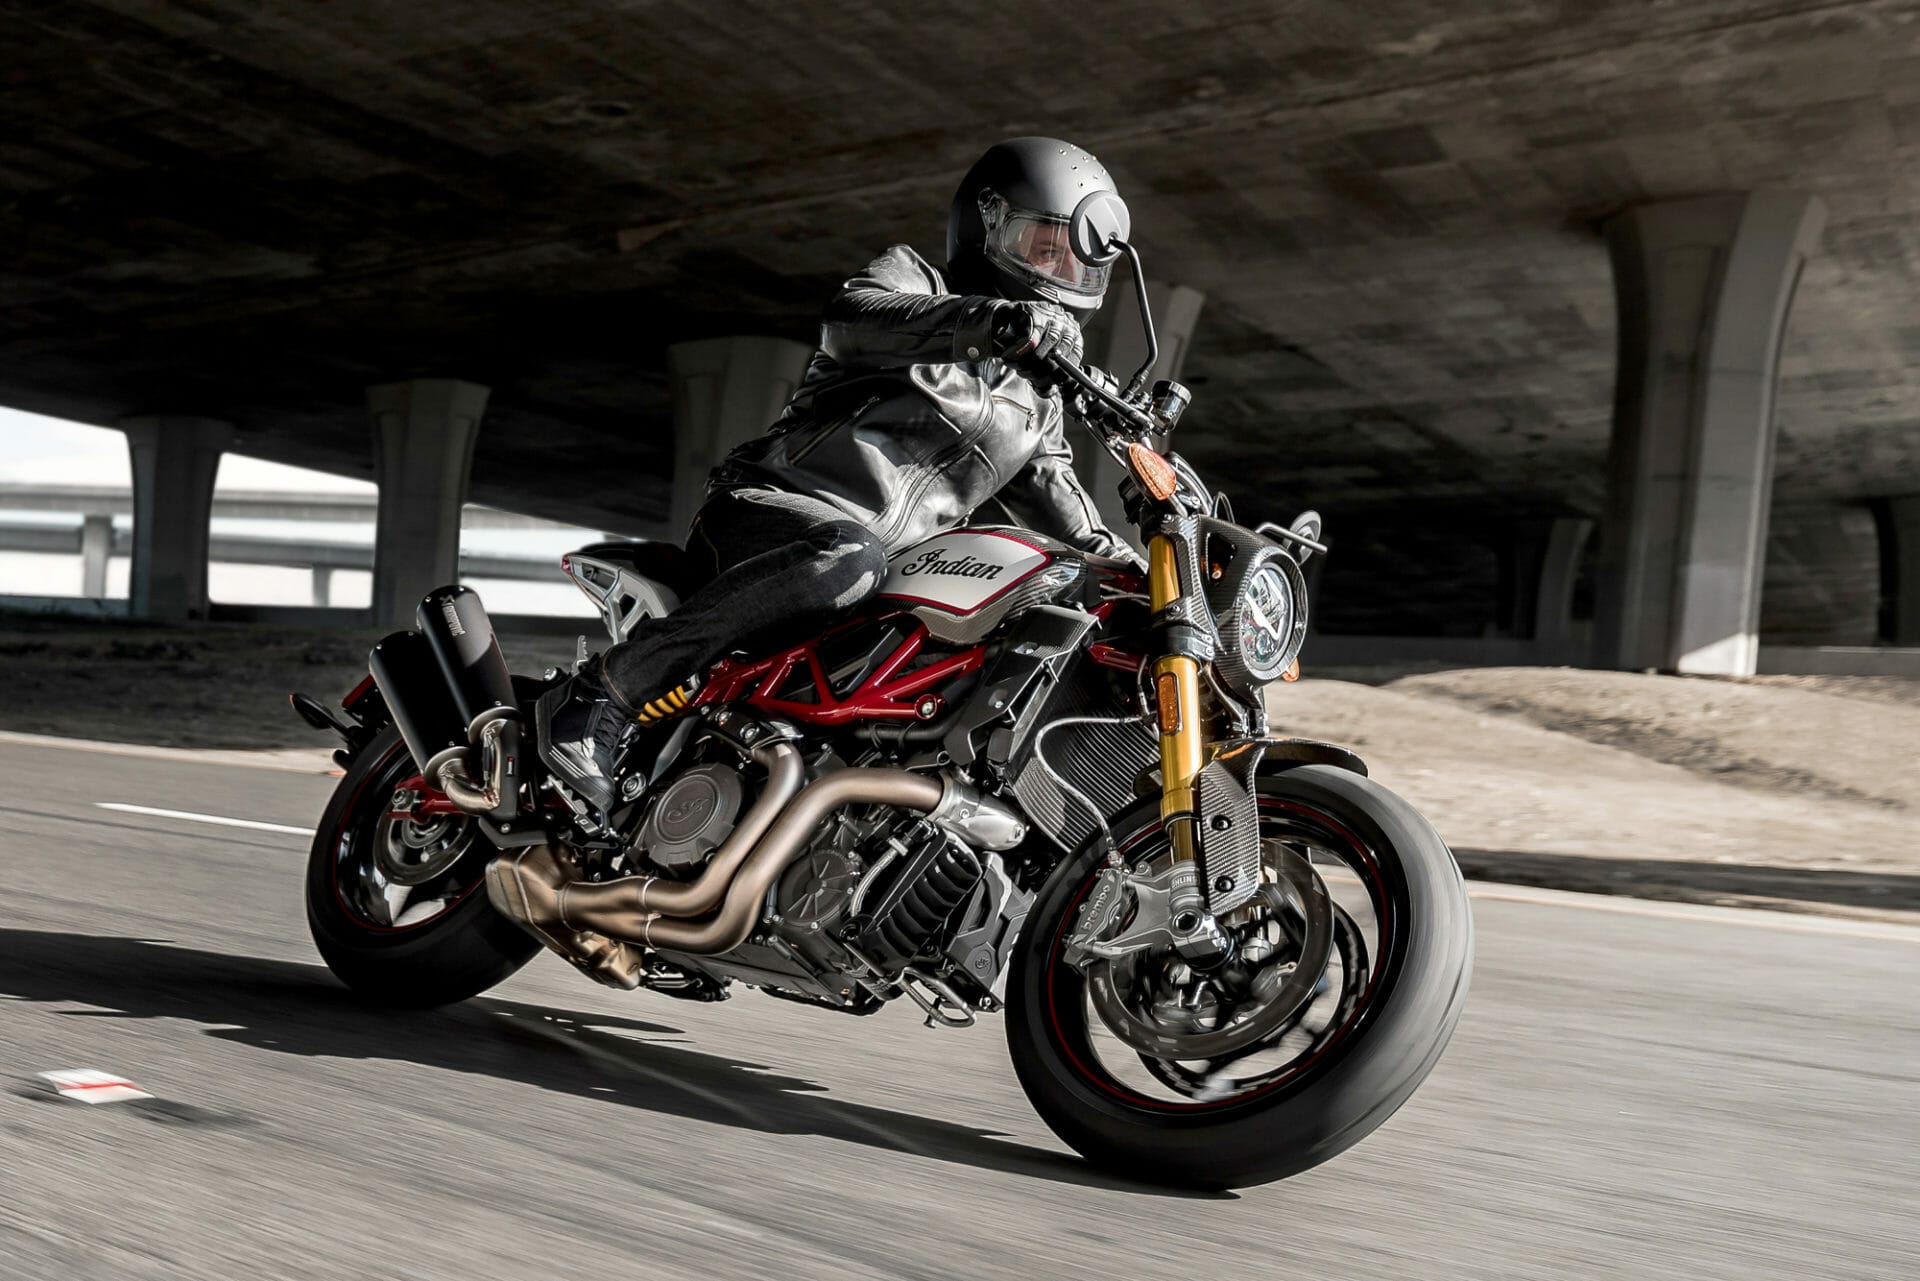 Indian revamps the FTR family
- also in the MOTORCYCLES.NEWS APP